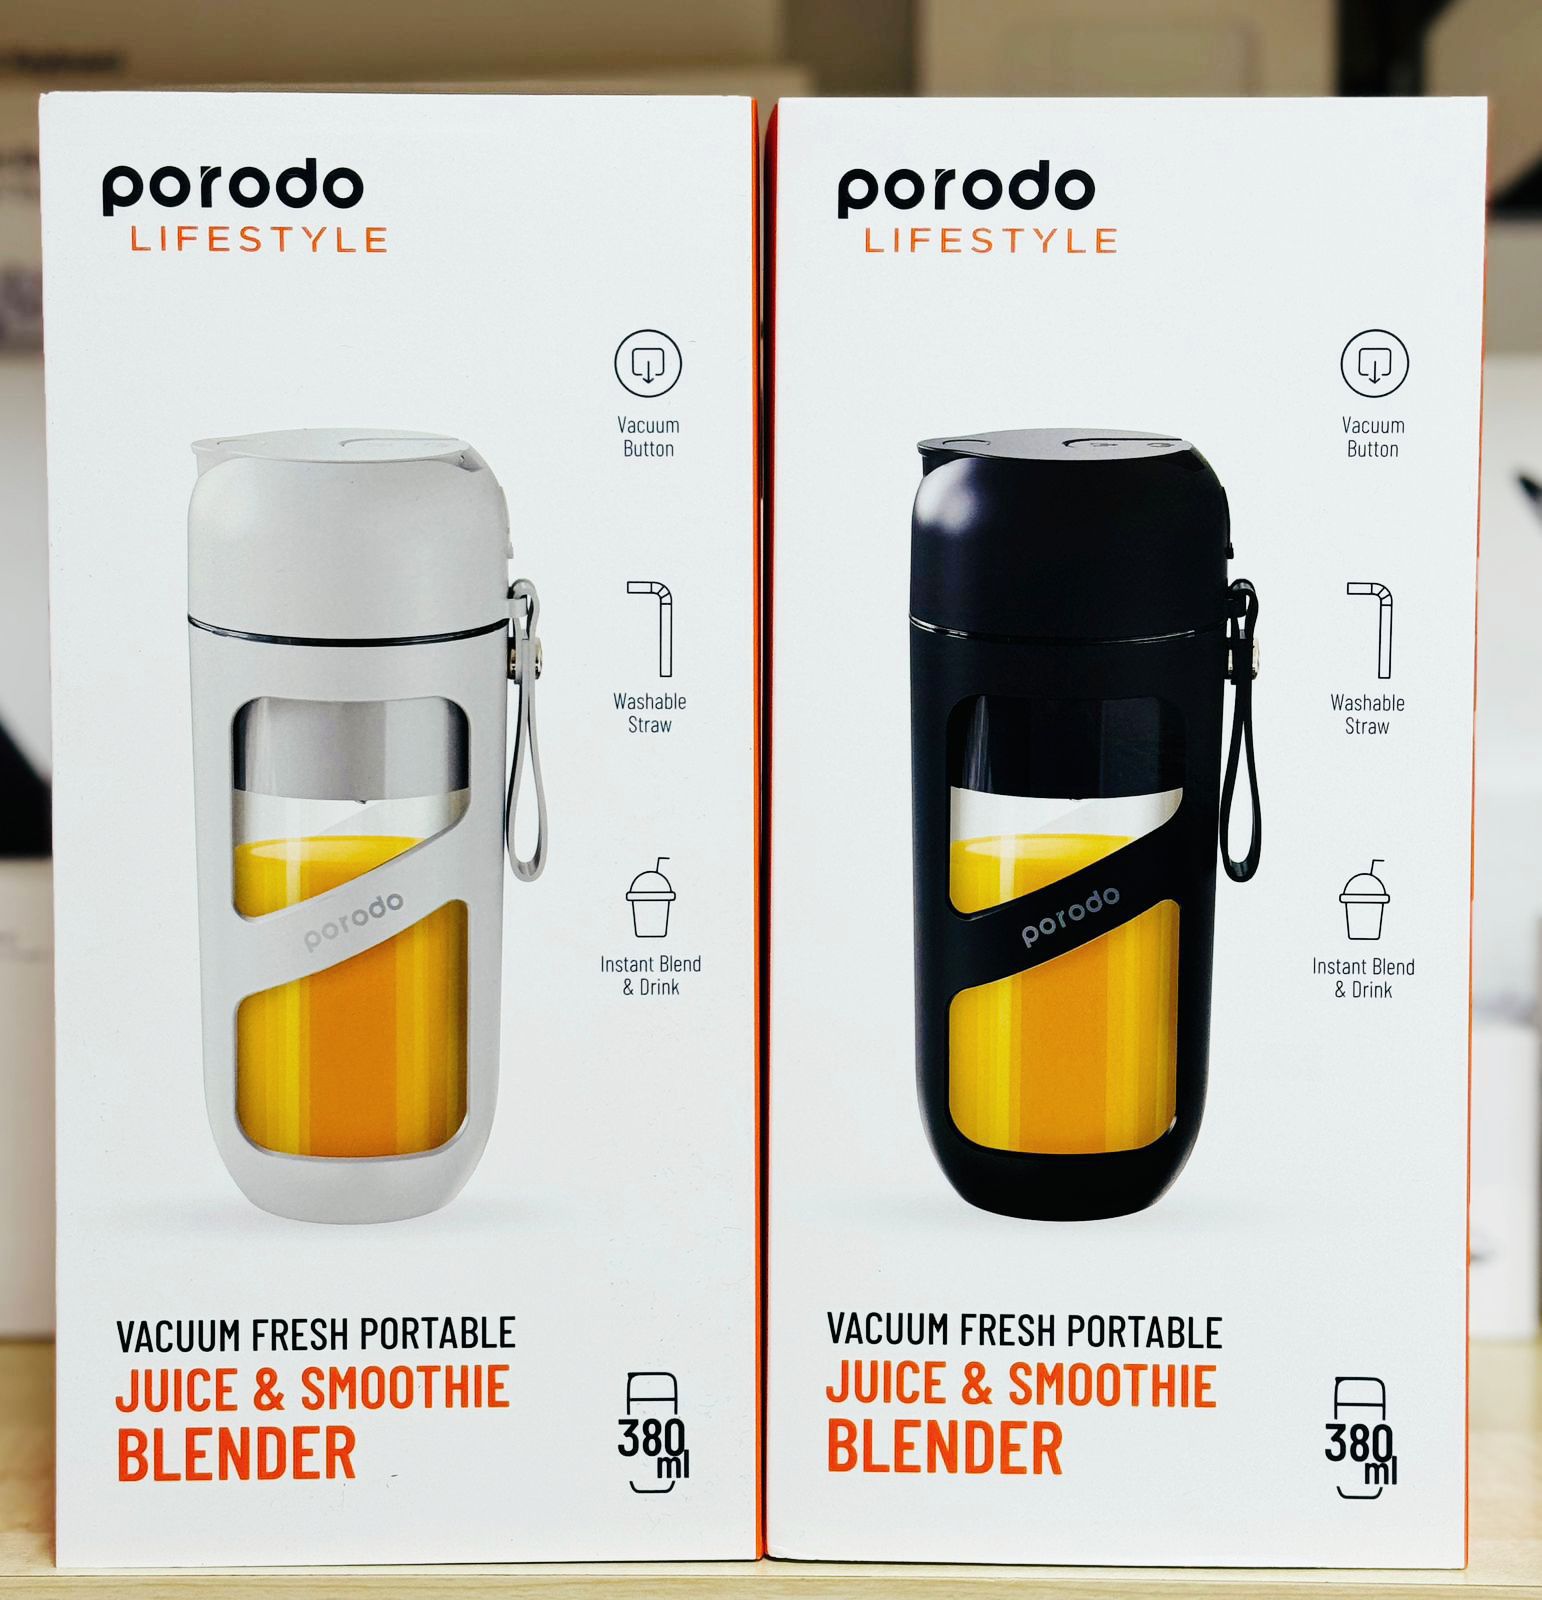 Porodo Lifestyle Portable Juice & Smoothie Blender: 380ml, 1500mAh Battery, 18000 RPM, 3-Hour Charge, 10 Cups Per Full Charge